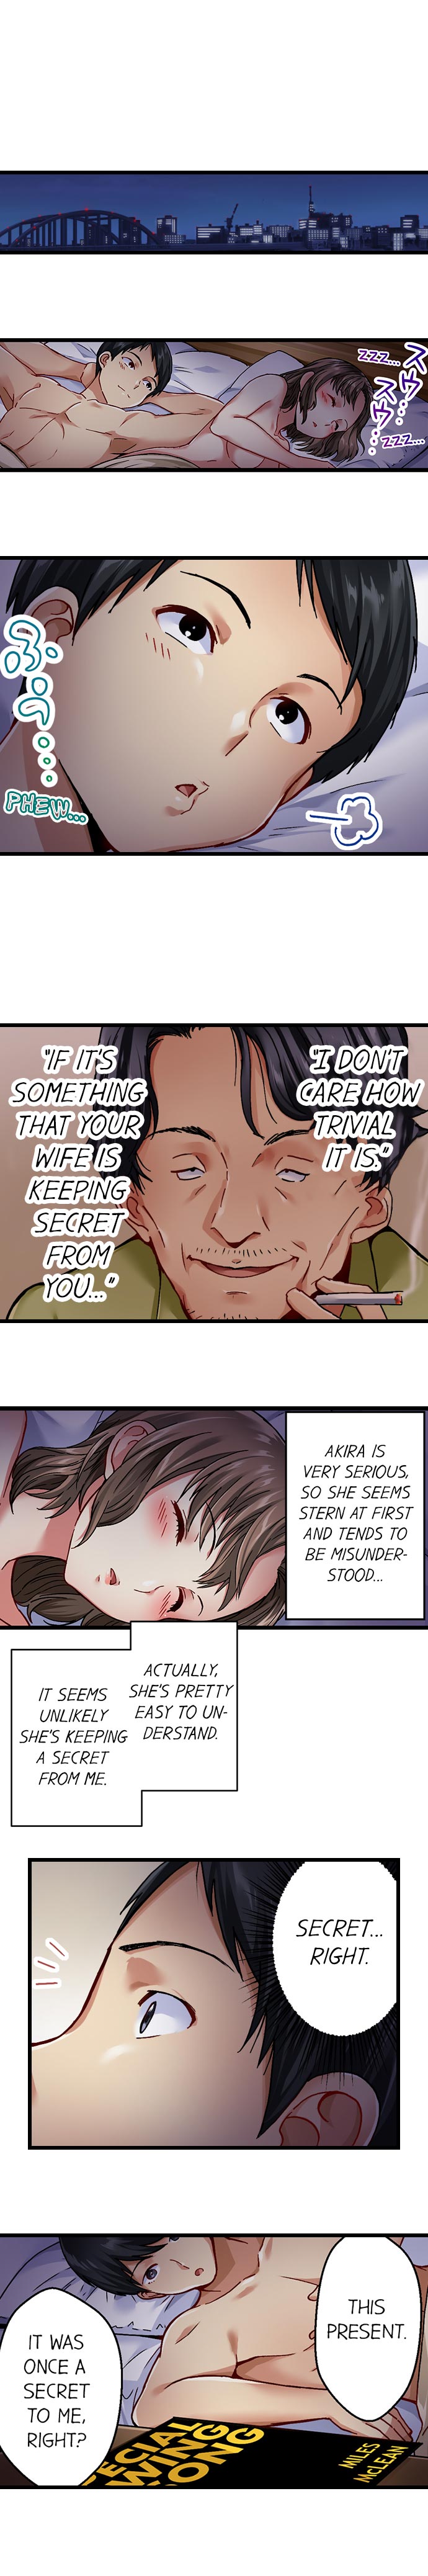 Selling My Wife’s Secrets - Chapter 1 Page 8